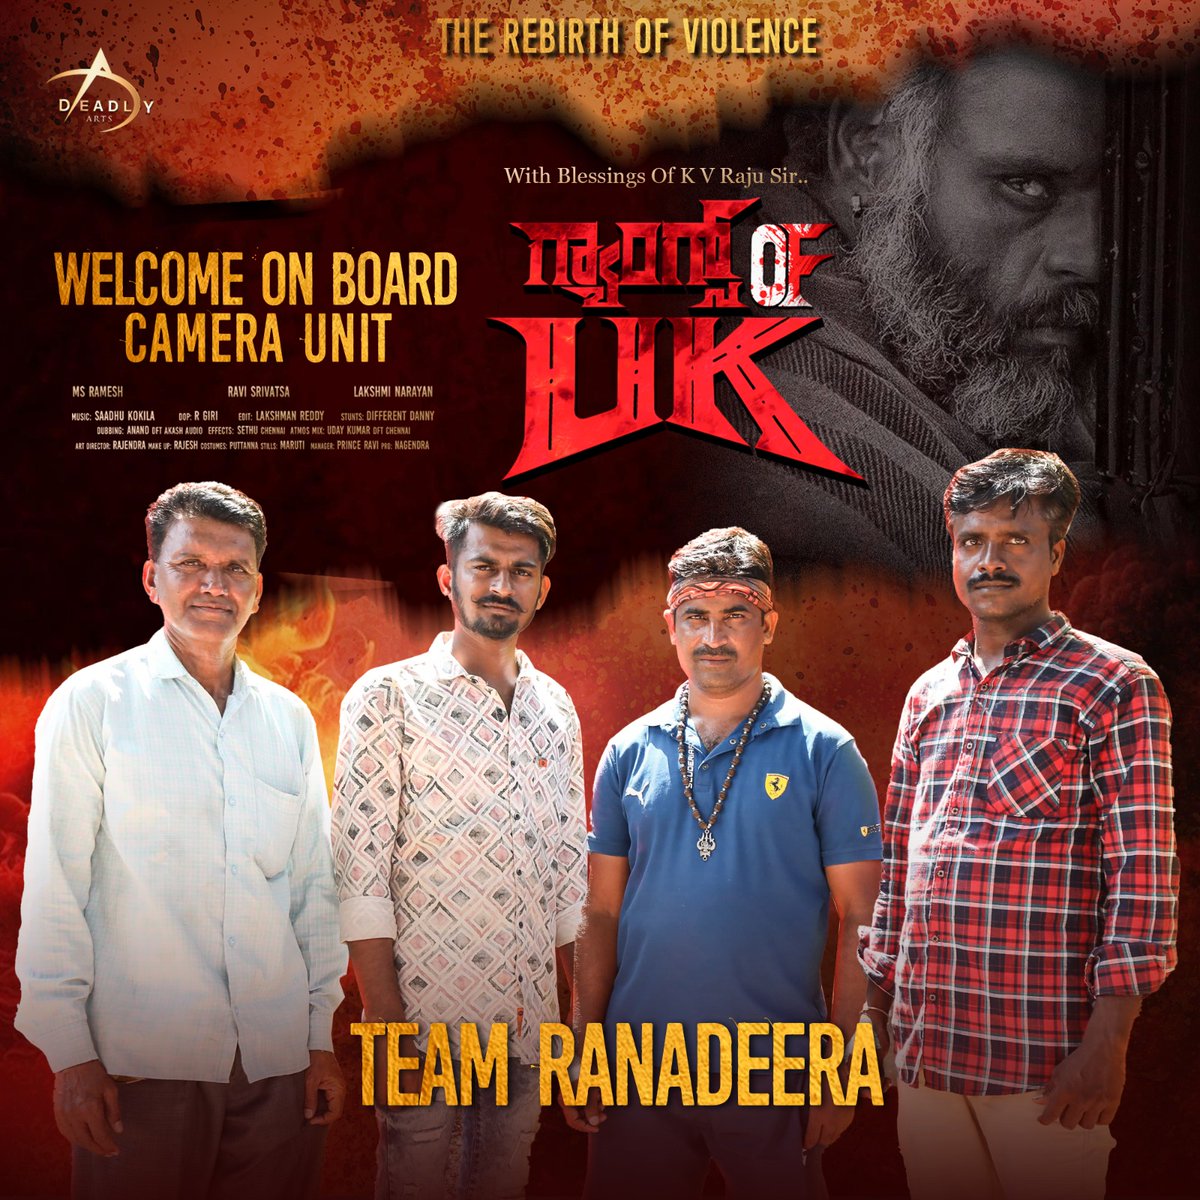 Welcome Team Ranadeera our Camera Unit!  Joining forces with the Gangs of UK film crew, let's capture unforgettable moments on screen!

#RaviSrivatsa #welcomeonboard #kfi #gangsofuk #kannadamovie #DeadlyArts